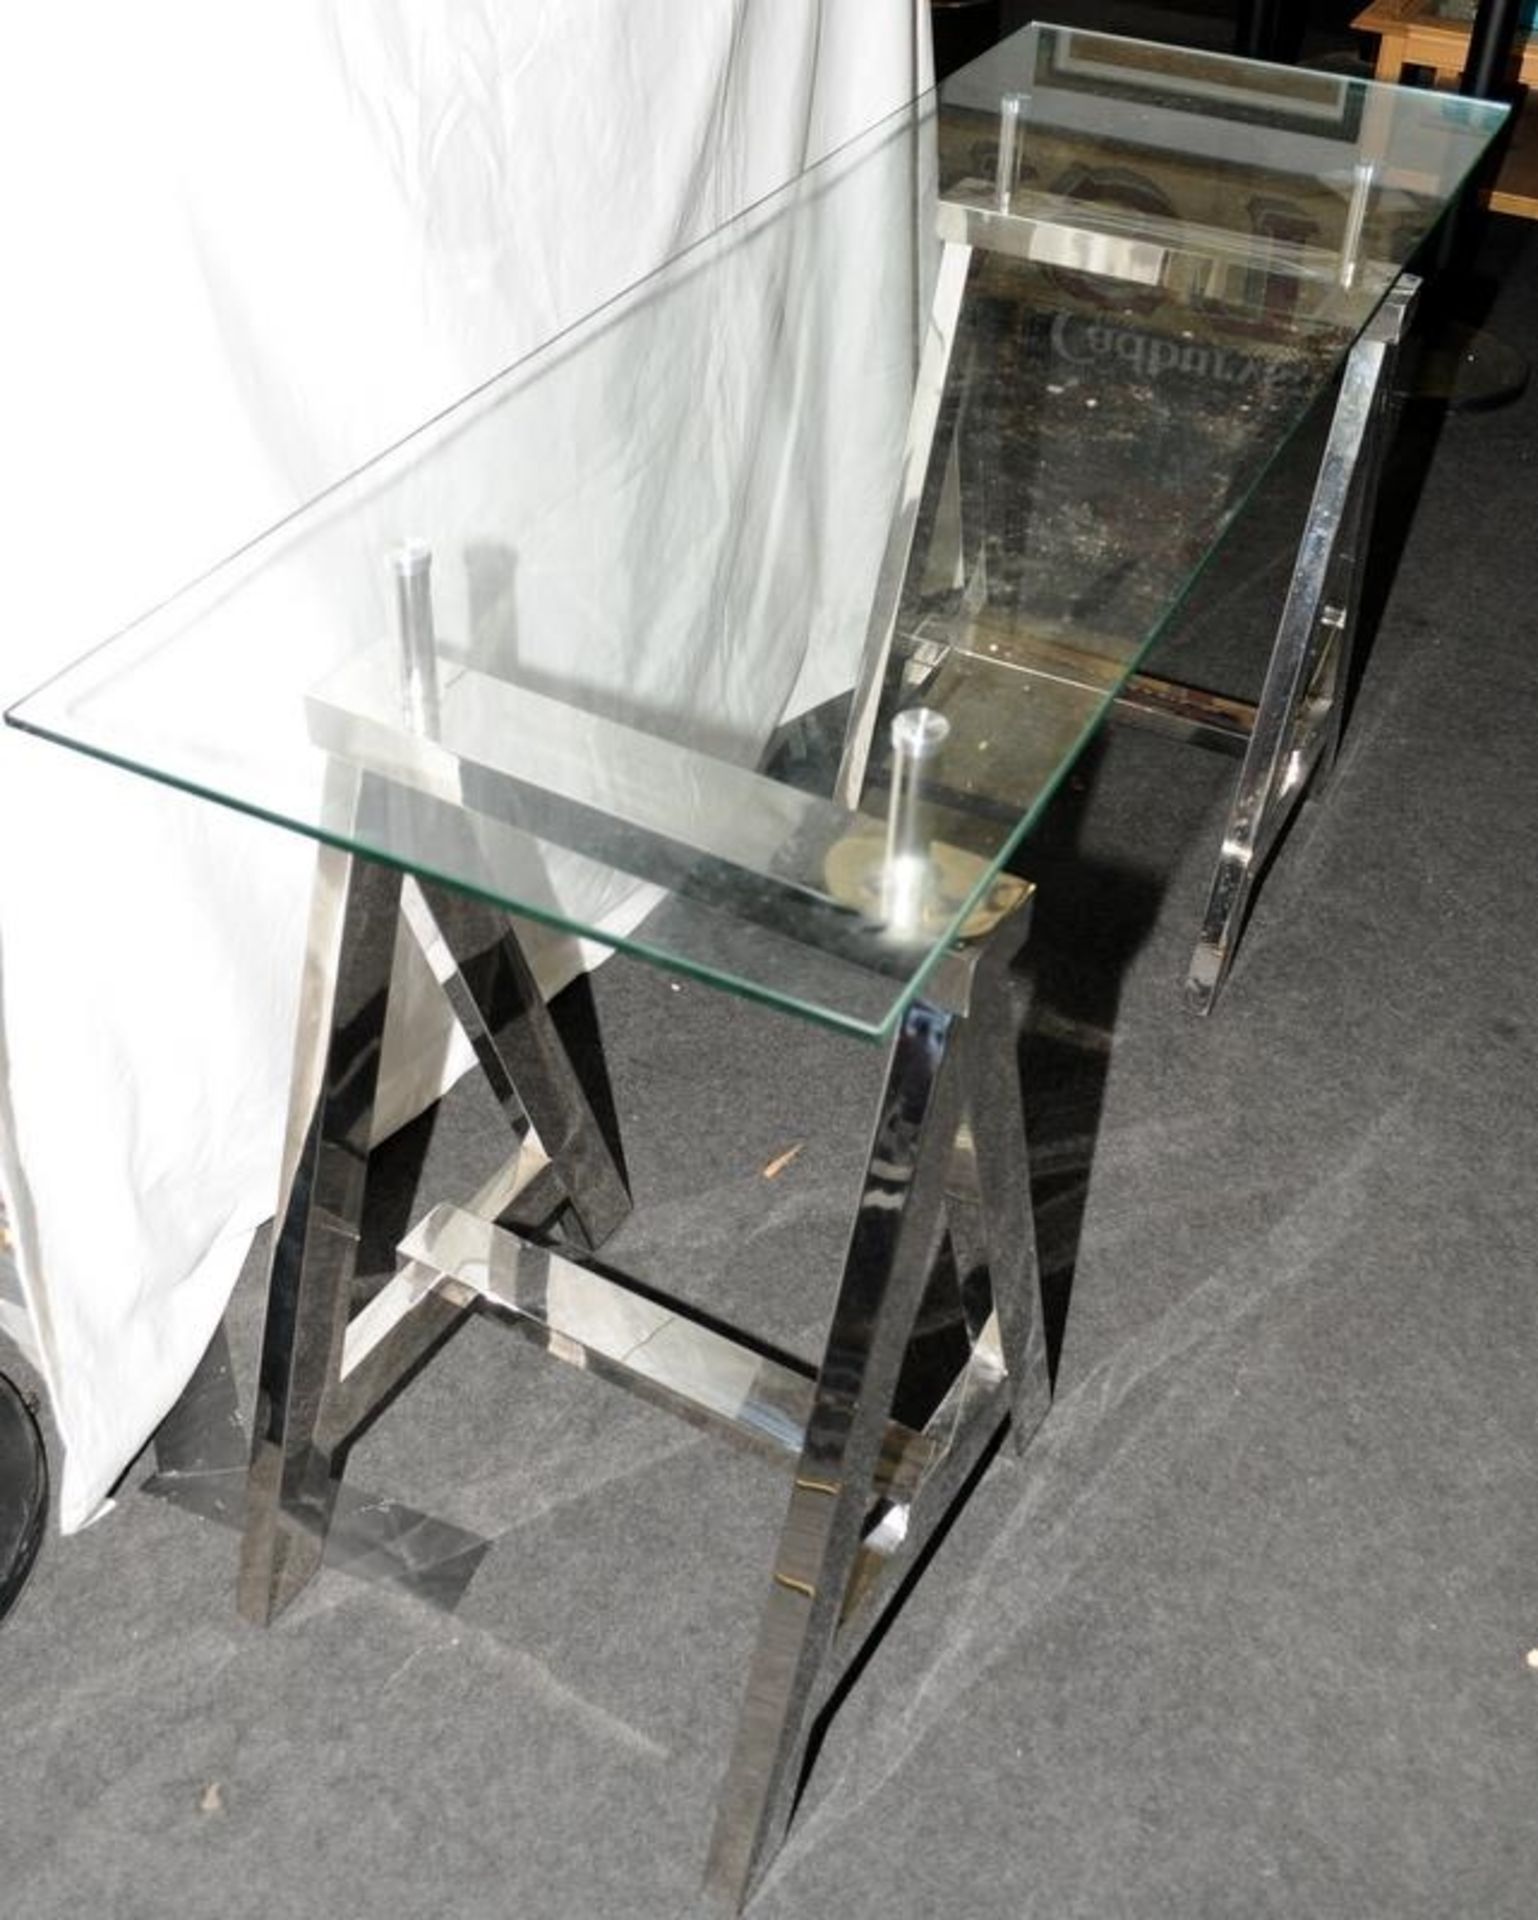 Chrome and glass designer saw horse leg console table 80x150x50cm - Image 2 of 2